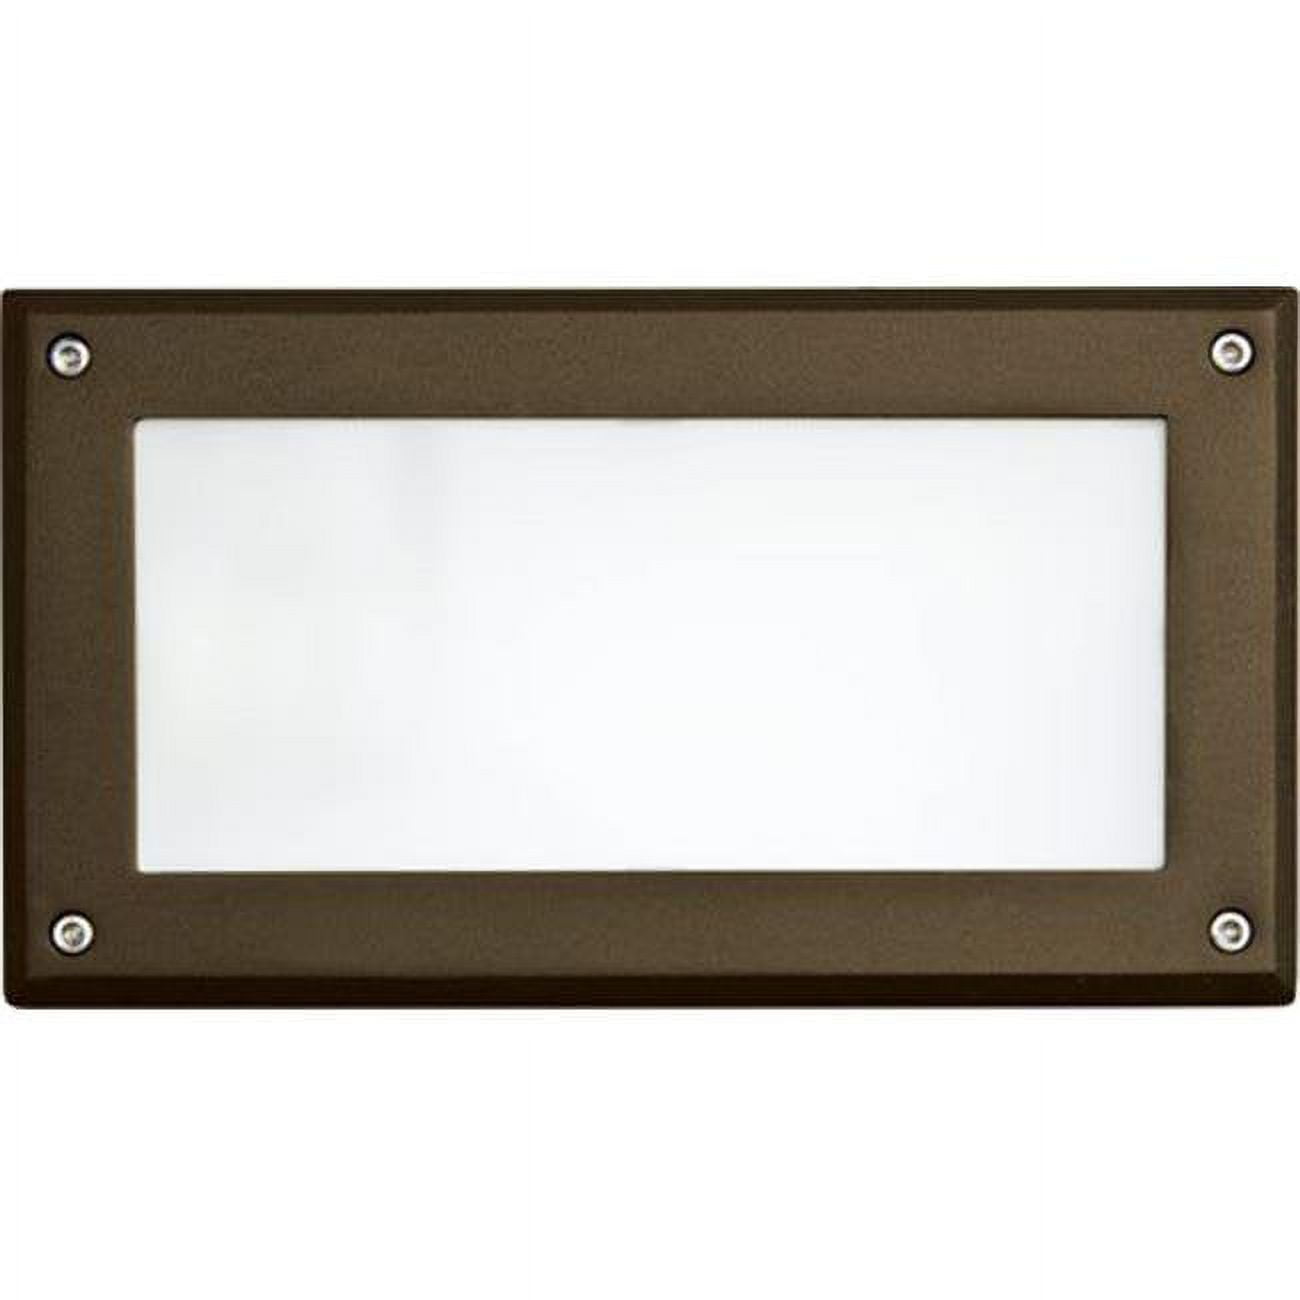 Recessed Open Face Brick, Step & Wall Light - 7w 120v, Bronze